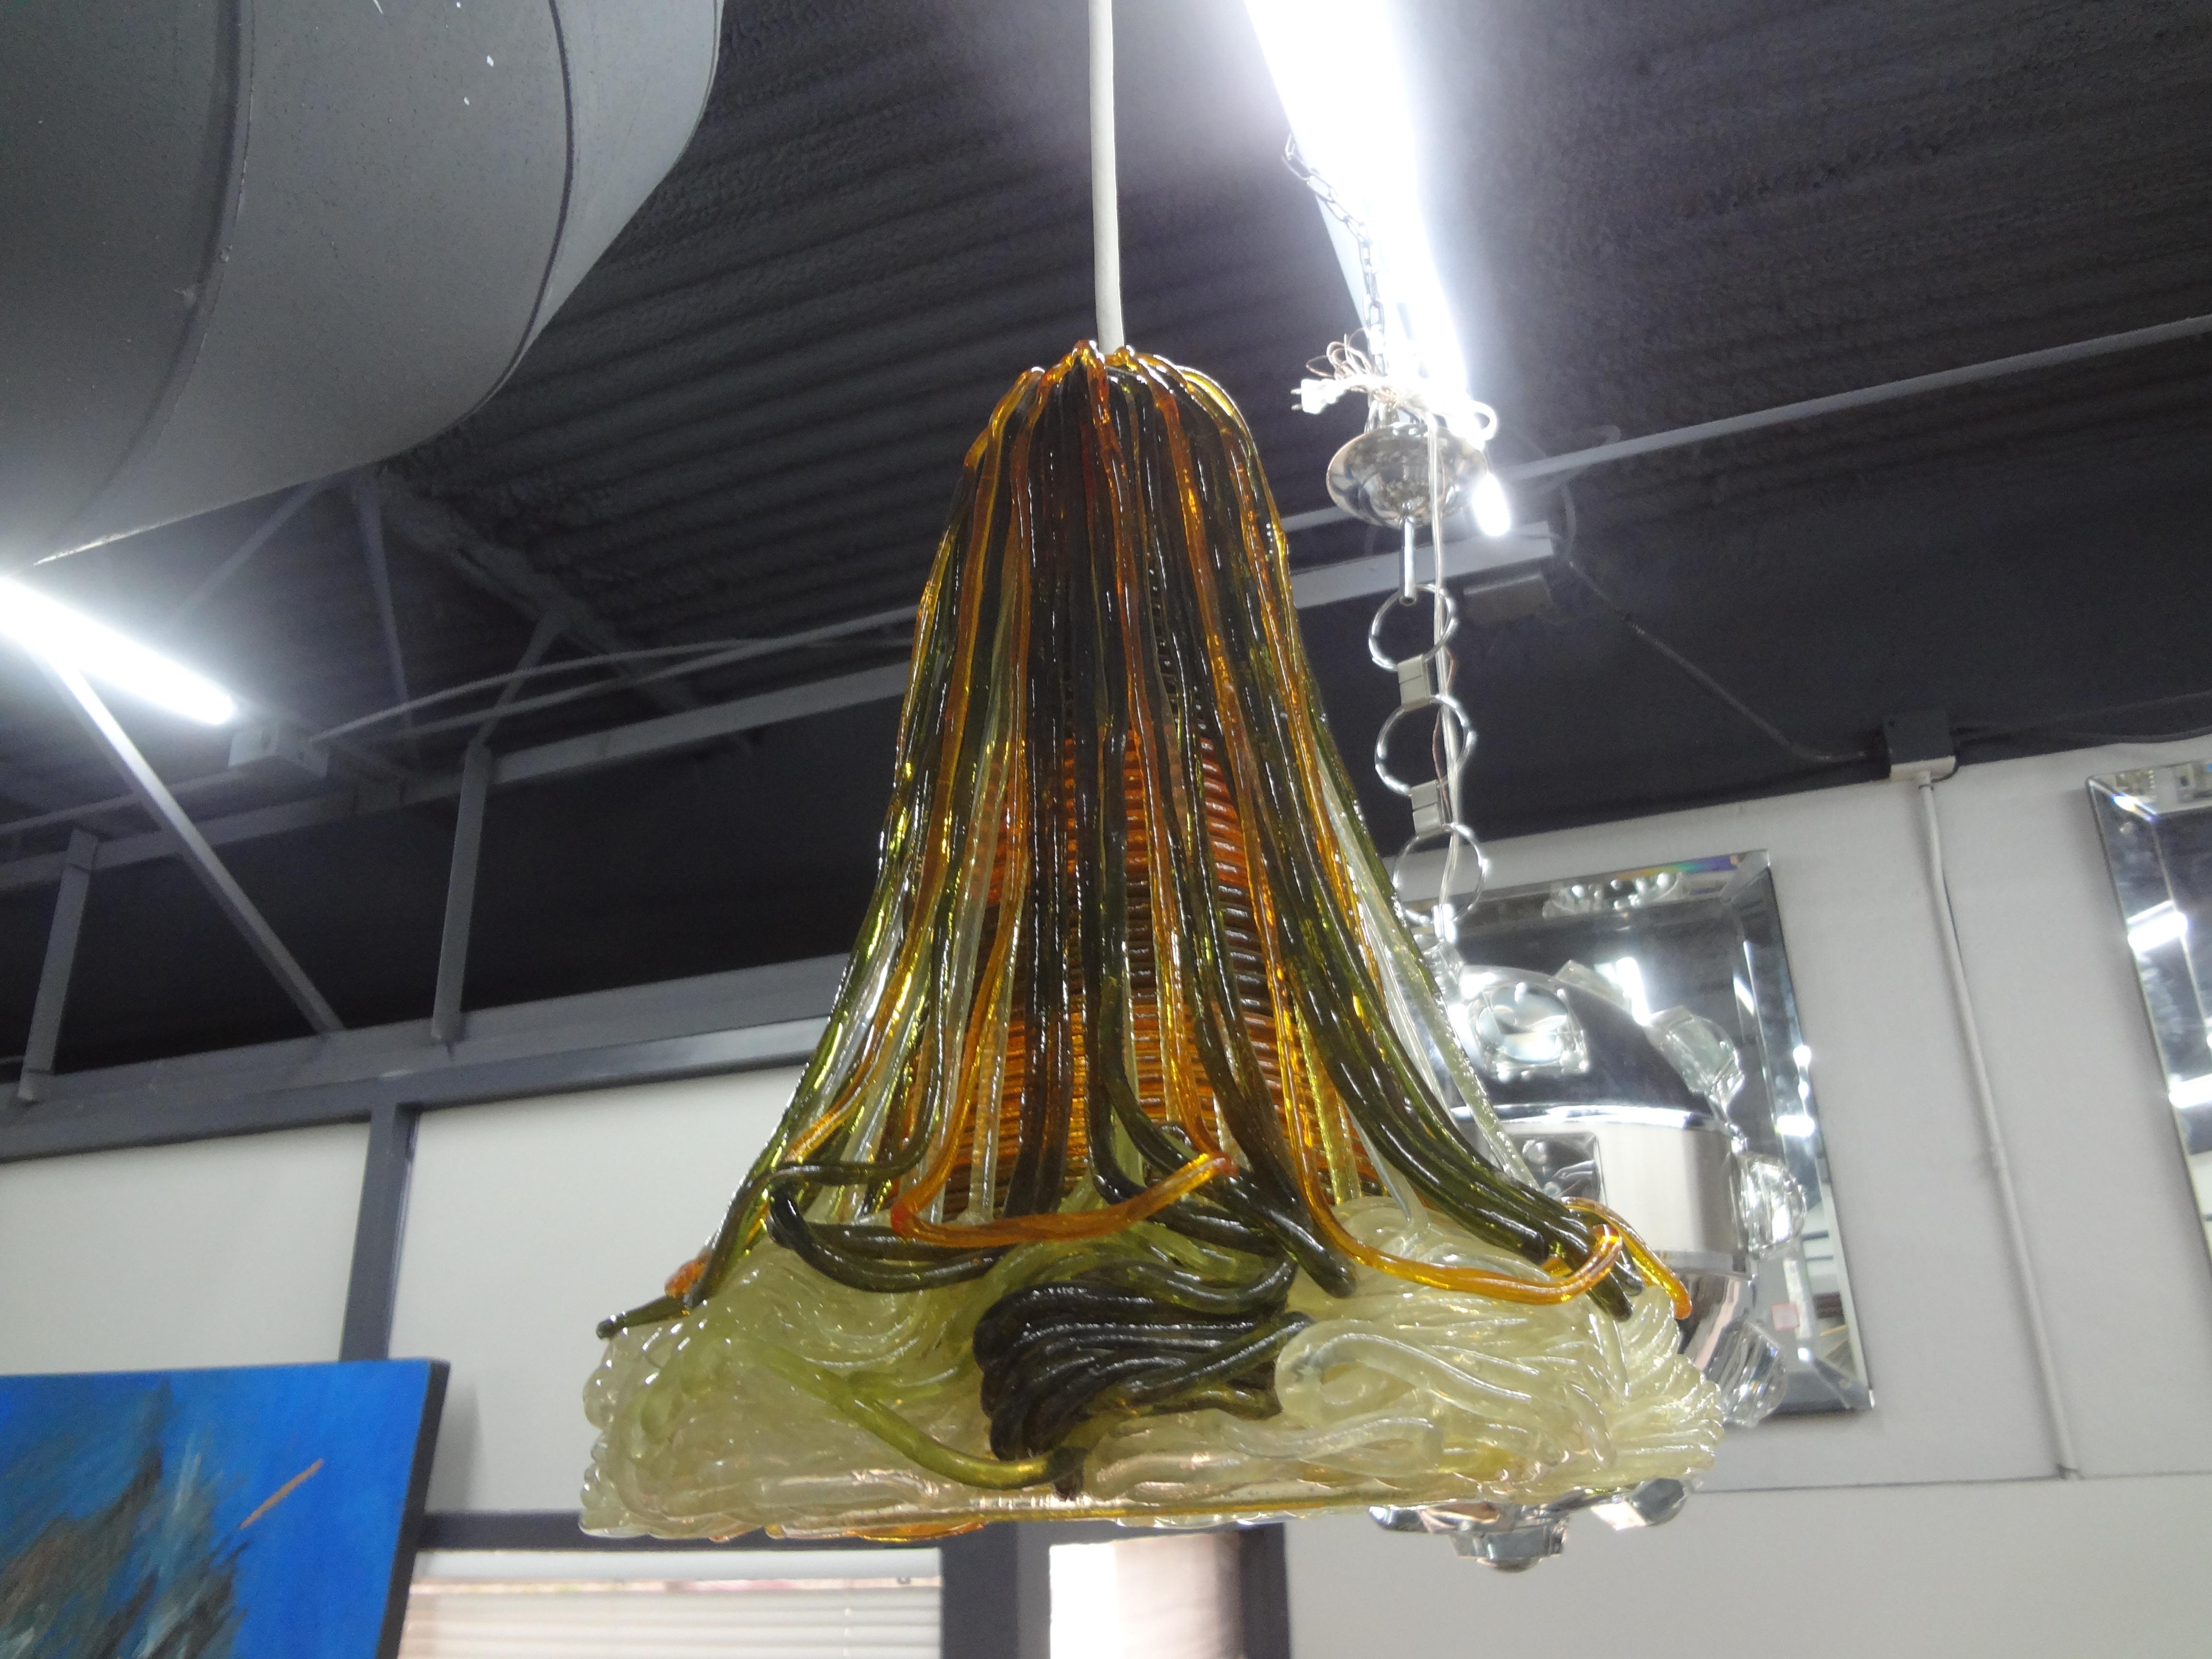 Mid Century Modern Spun Lucite Pendant or Lantern.
This stunning pendant or lantern was formed with translucent, green and orange lucite or acrylic in a bell shape newly wired with a new Edison socket. This unusual lantern casts the most beautiful